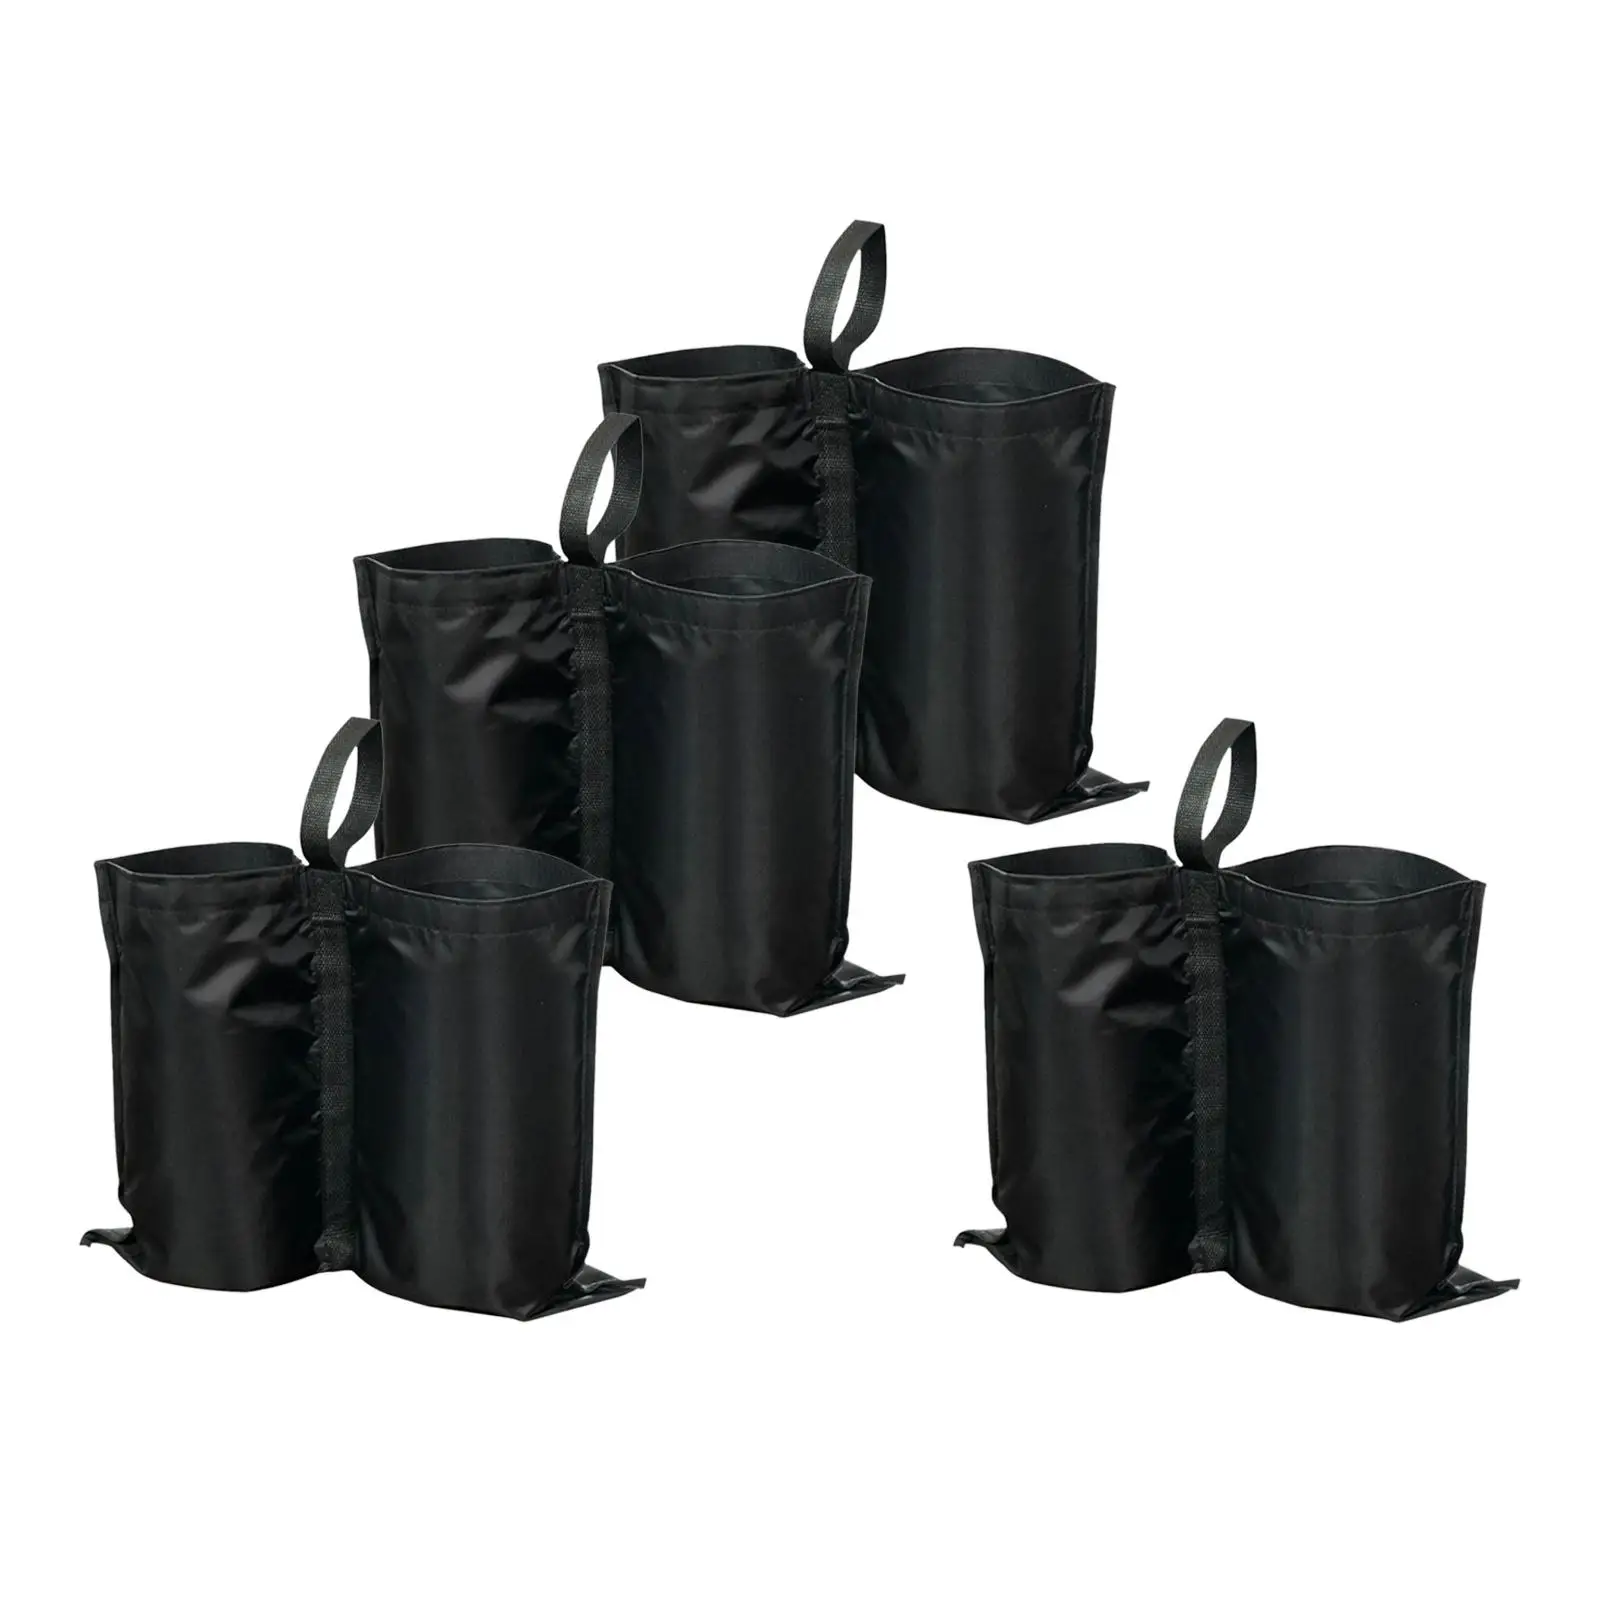 4x Leg Canopy Weights Sand Bags Heavy Duty Canopy Weight Bags for Instant Outdoor Shelter Canopy Canopy Tent Patio Umbrella